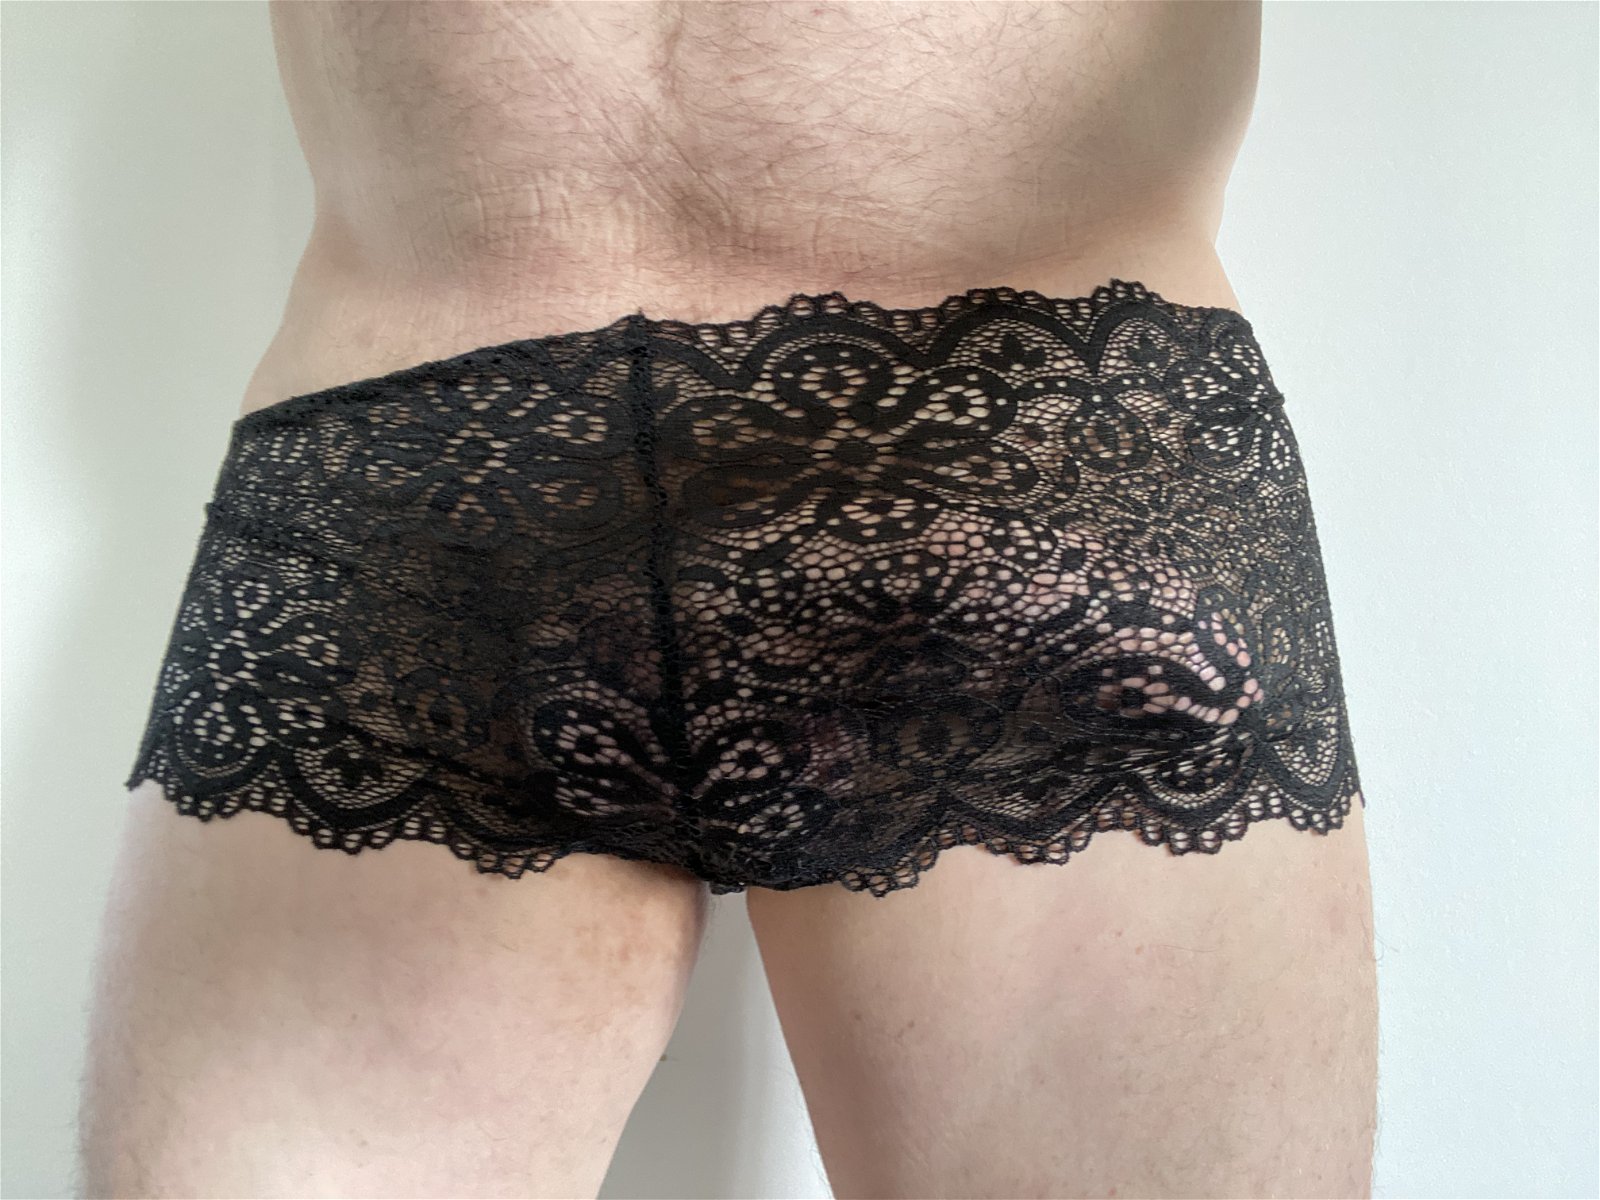 Photo by Men in Stockings, Nylons & knickers with the username @Tanmyboy,  August 9, 2020 at 6:39 AM. The post is about the topic Bulgewatch and the text says 'I inspected my boyfriend wearing my knickers and gave him a Stage inspection, what do you think?'